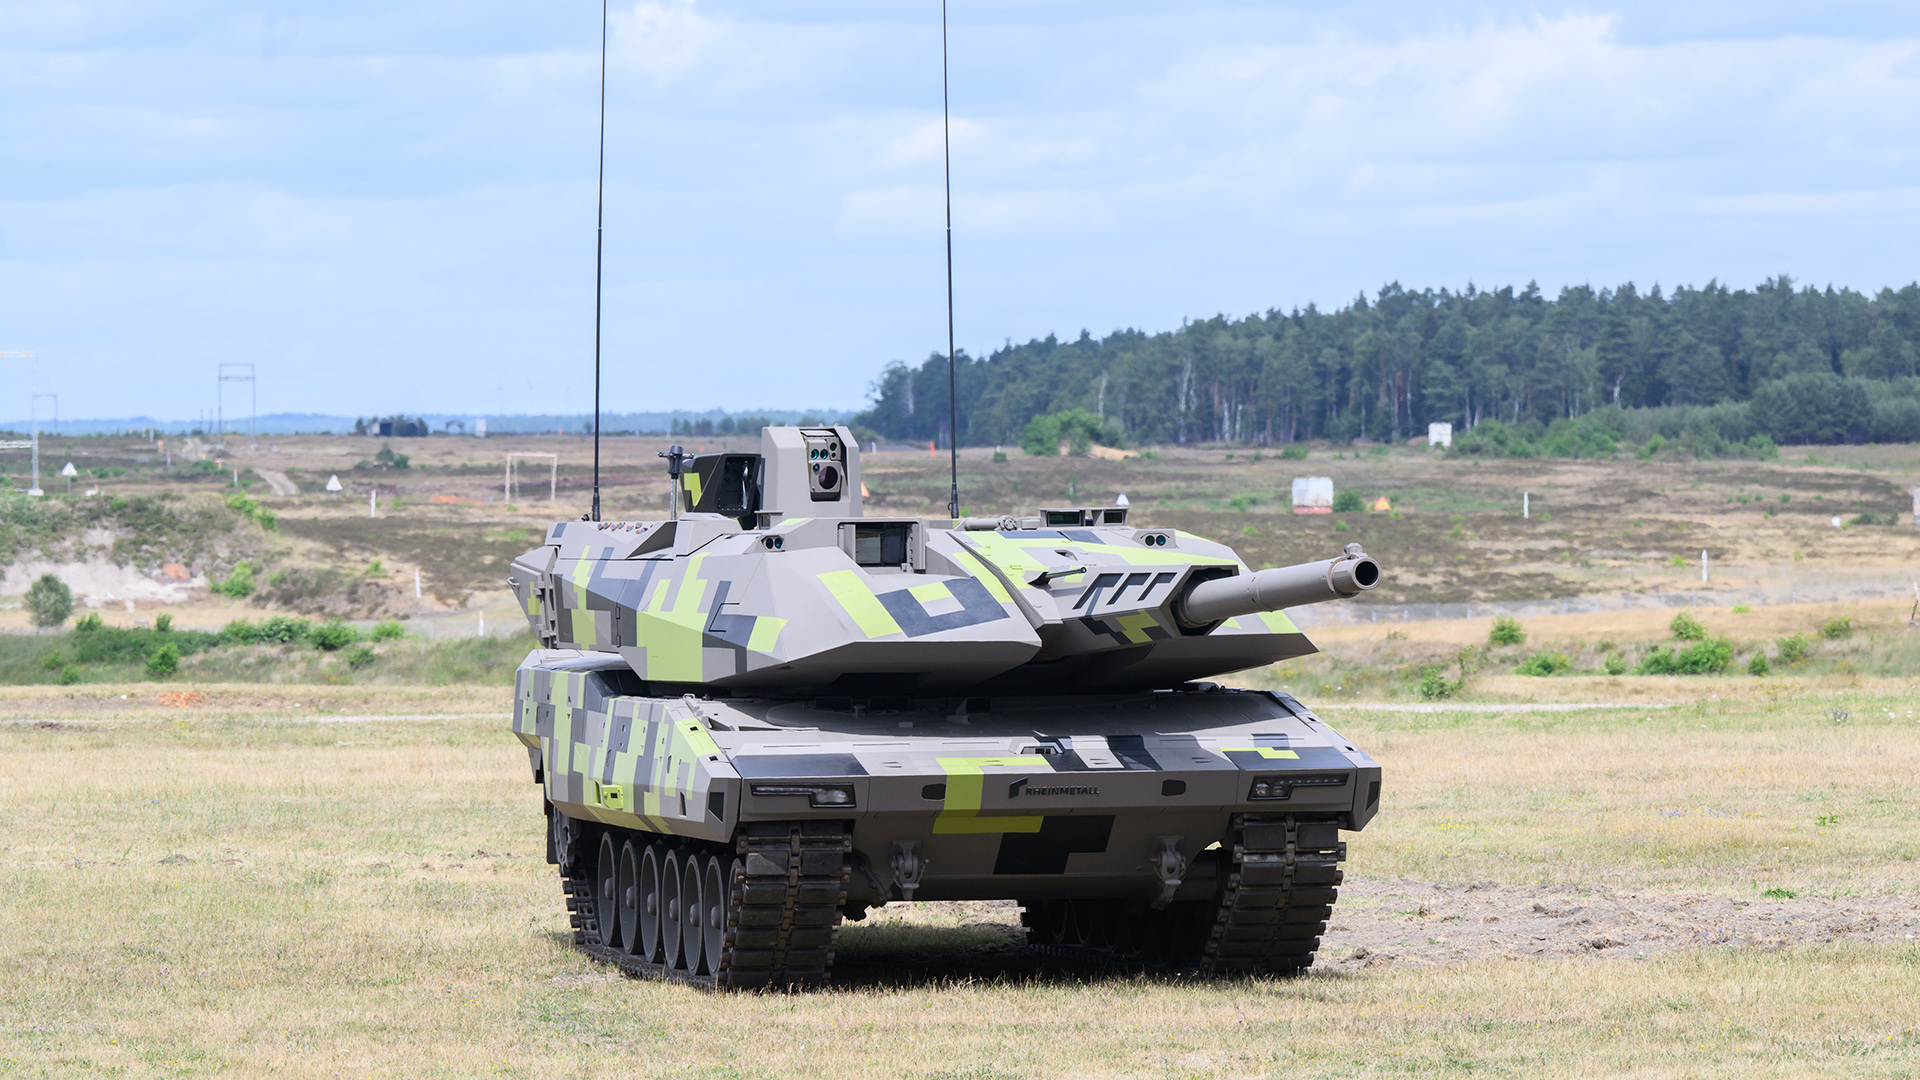 KF51 Panther | picture alliance/dpa